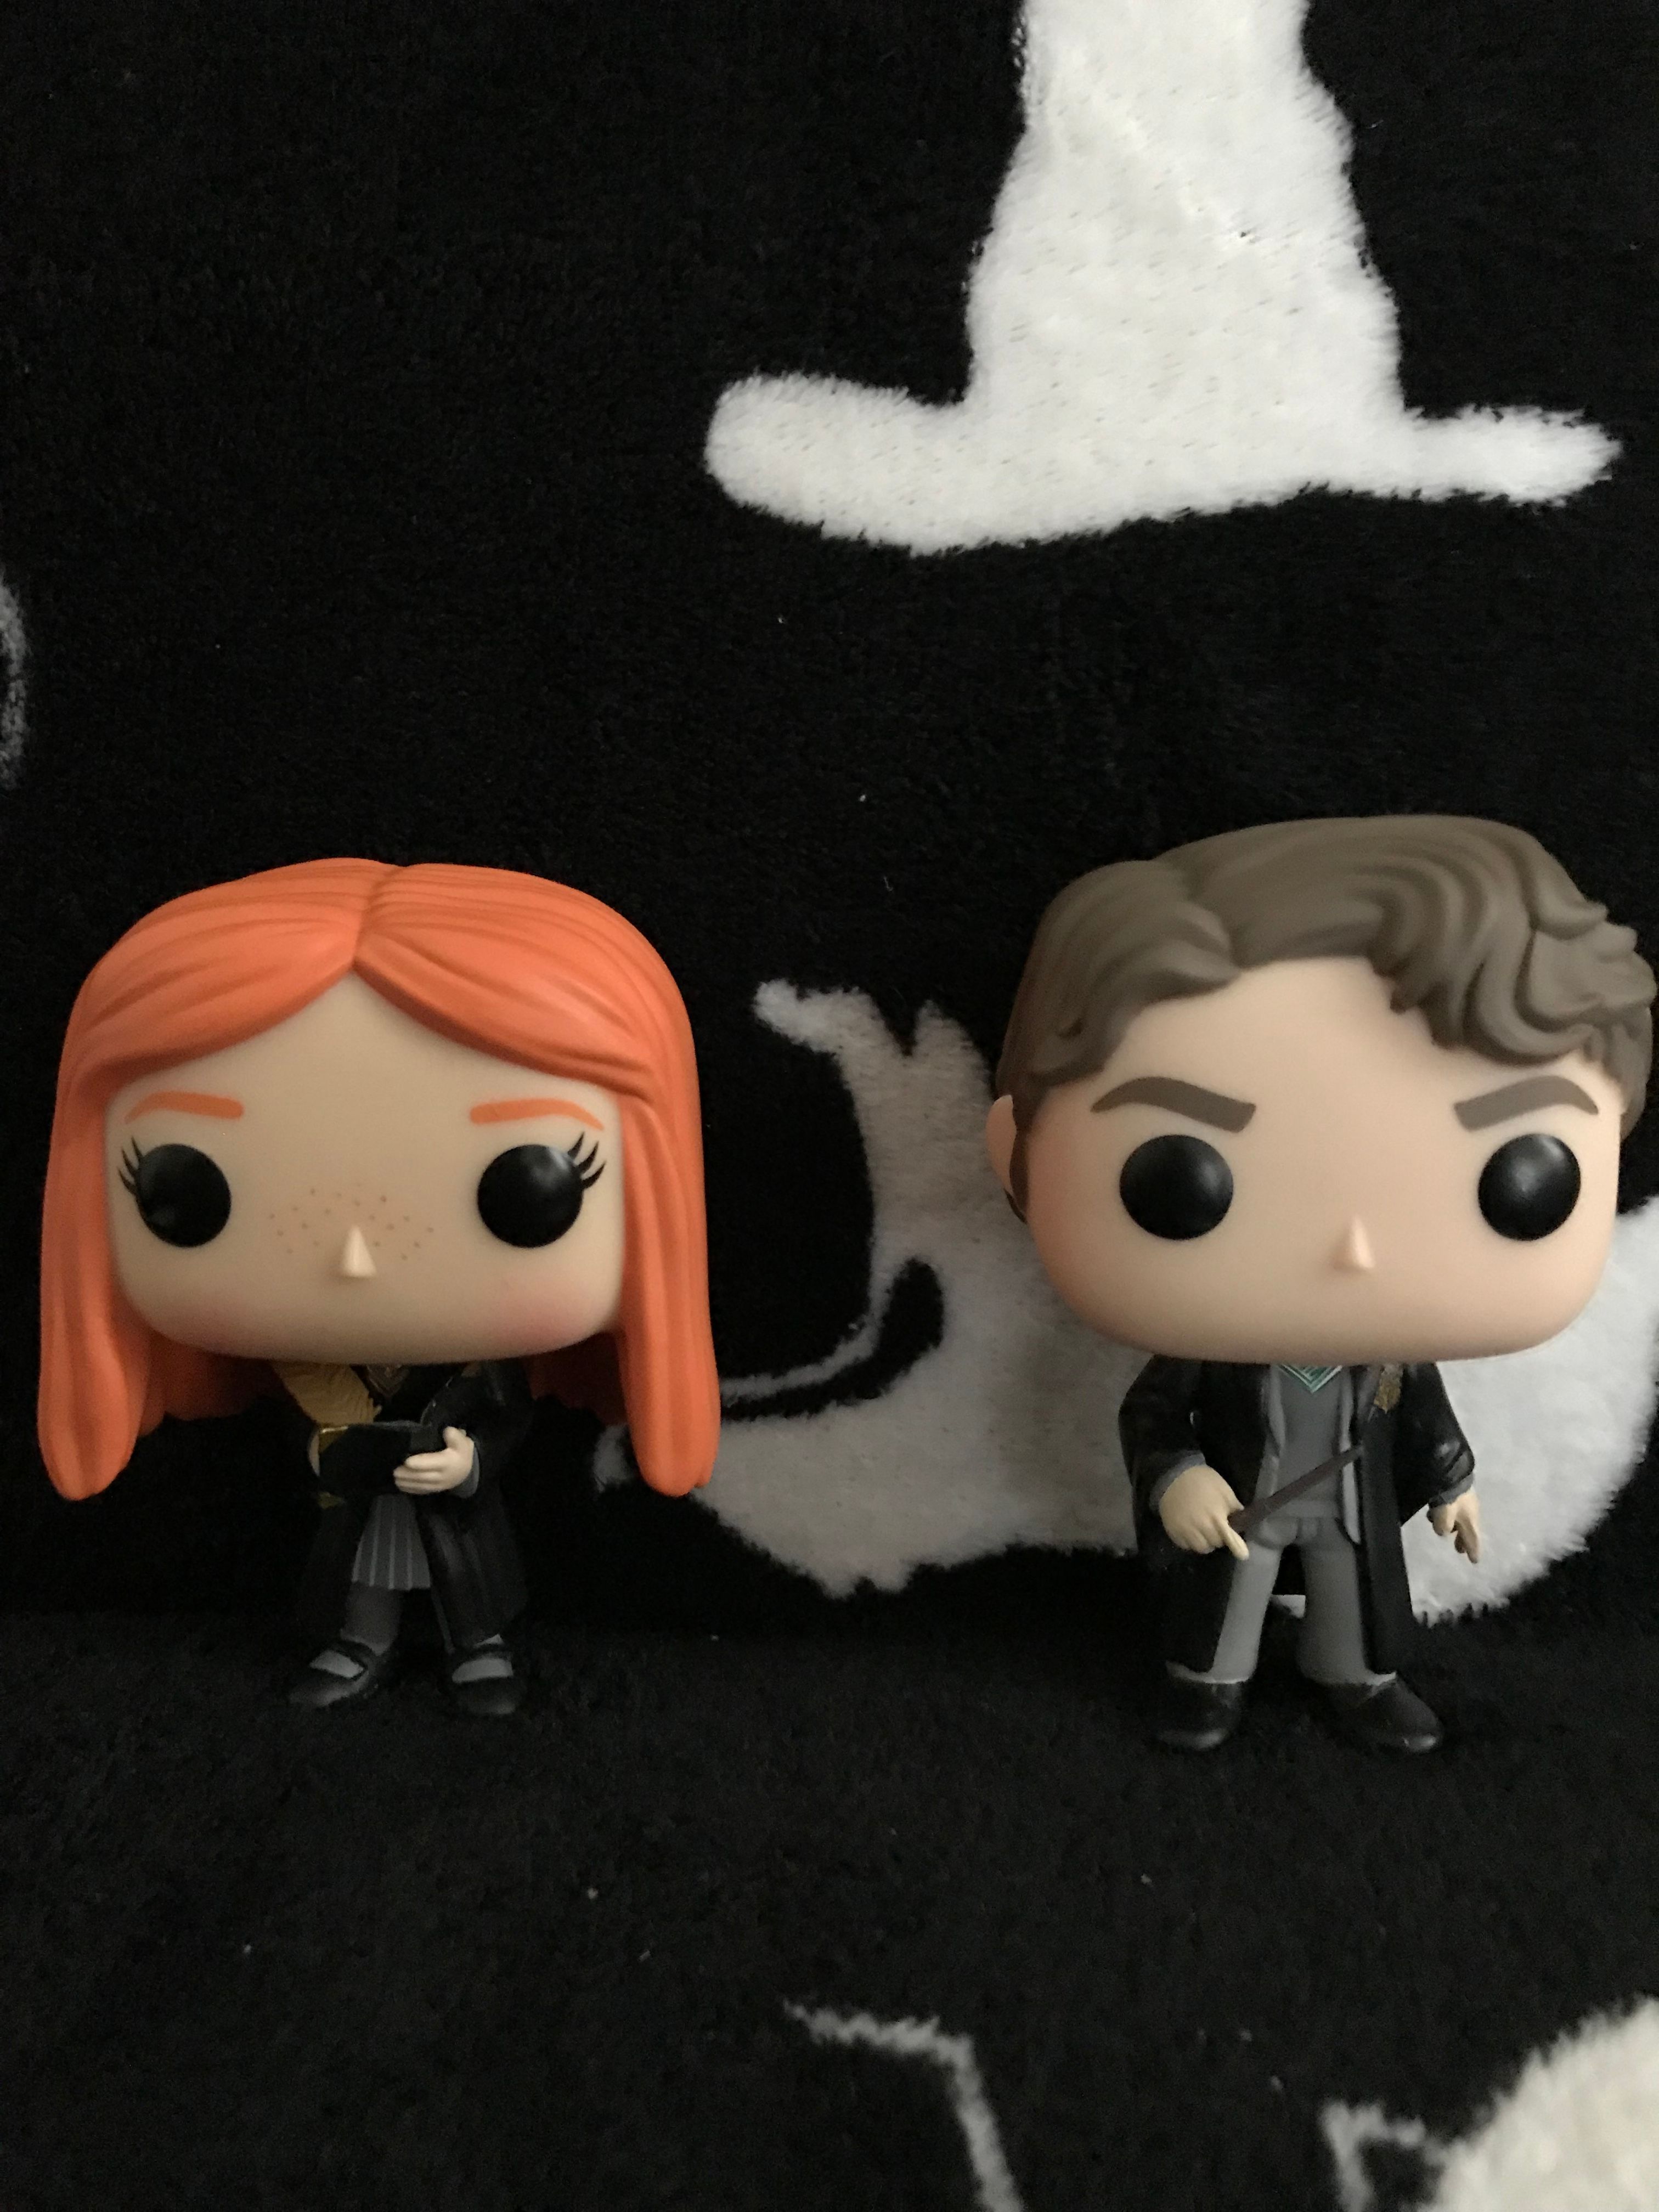 Ginny Weasley and Tom Riddle